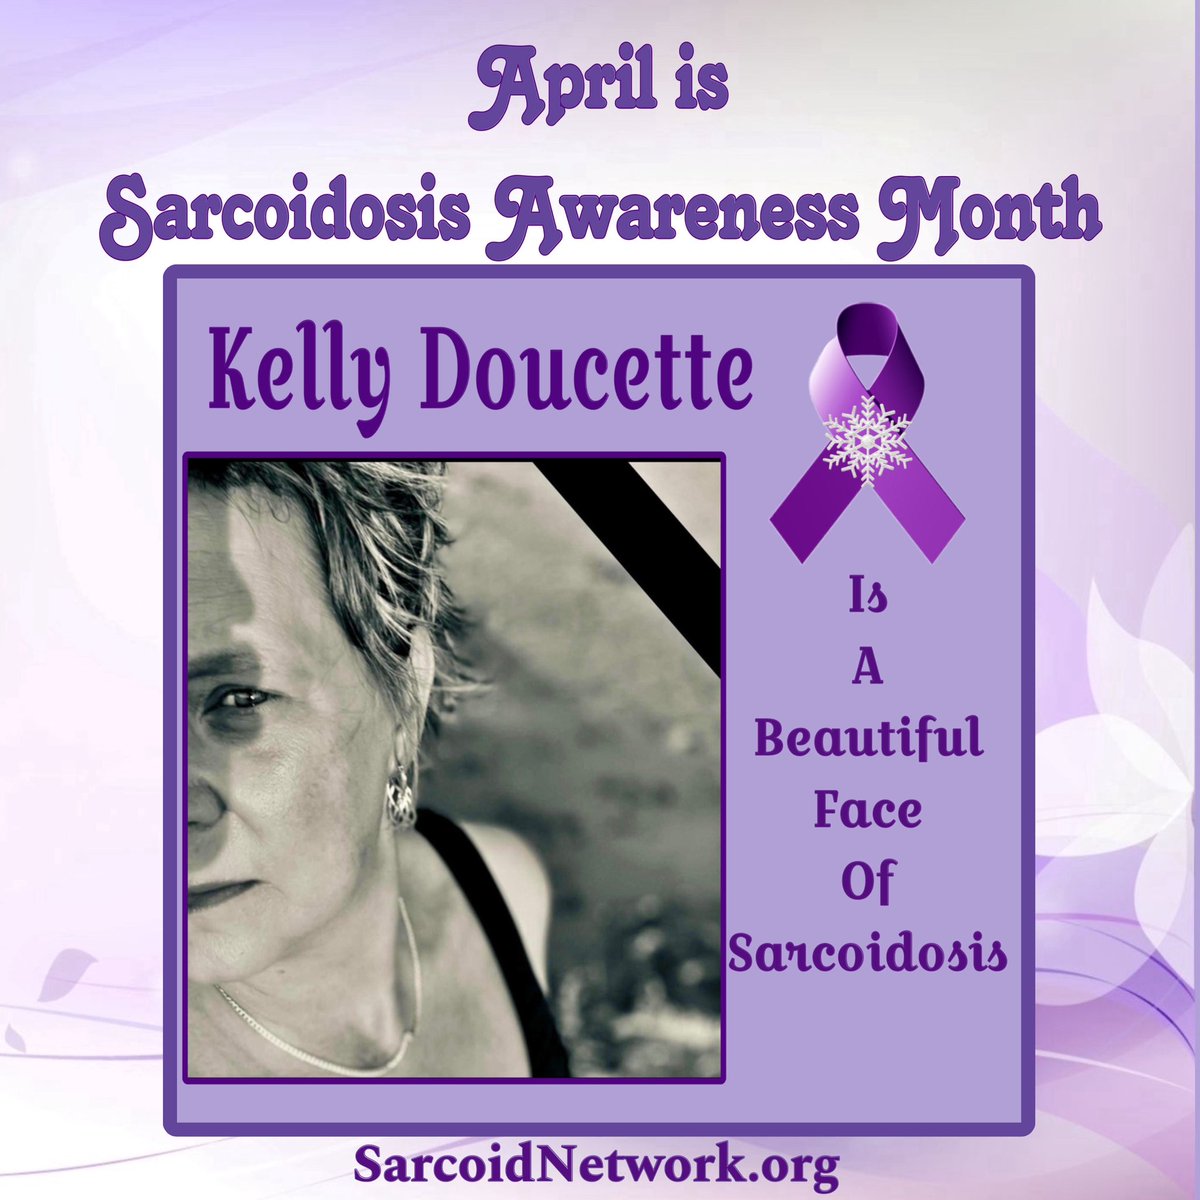 This is our Sarcoidosis Kelly Doucette and she is a Beautiful Face of Sarcoidosis!💜 #Sarcoidosis #raredisease #patientadvocate #sarcoidosisadvocate #beautifulfacesofsarcoidosis #sarcoidosisawarenessmonth